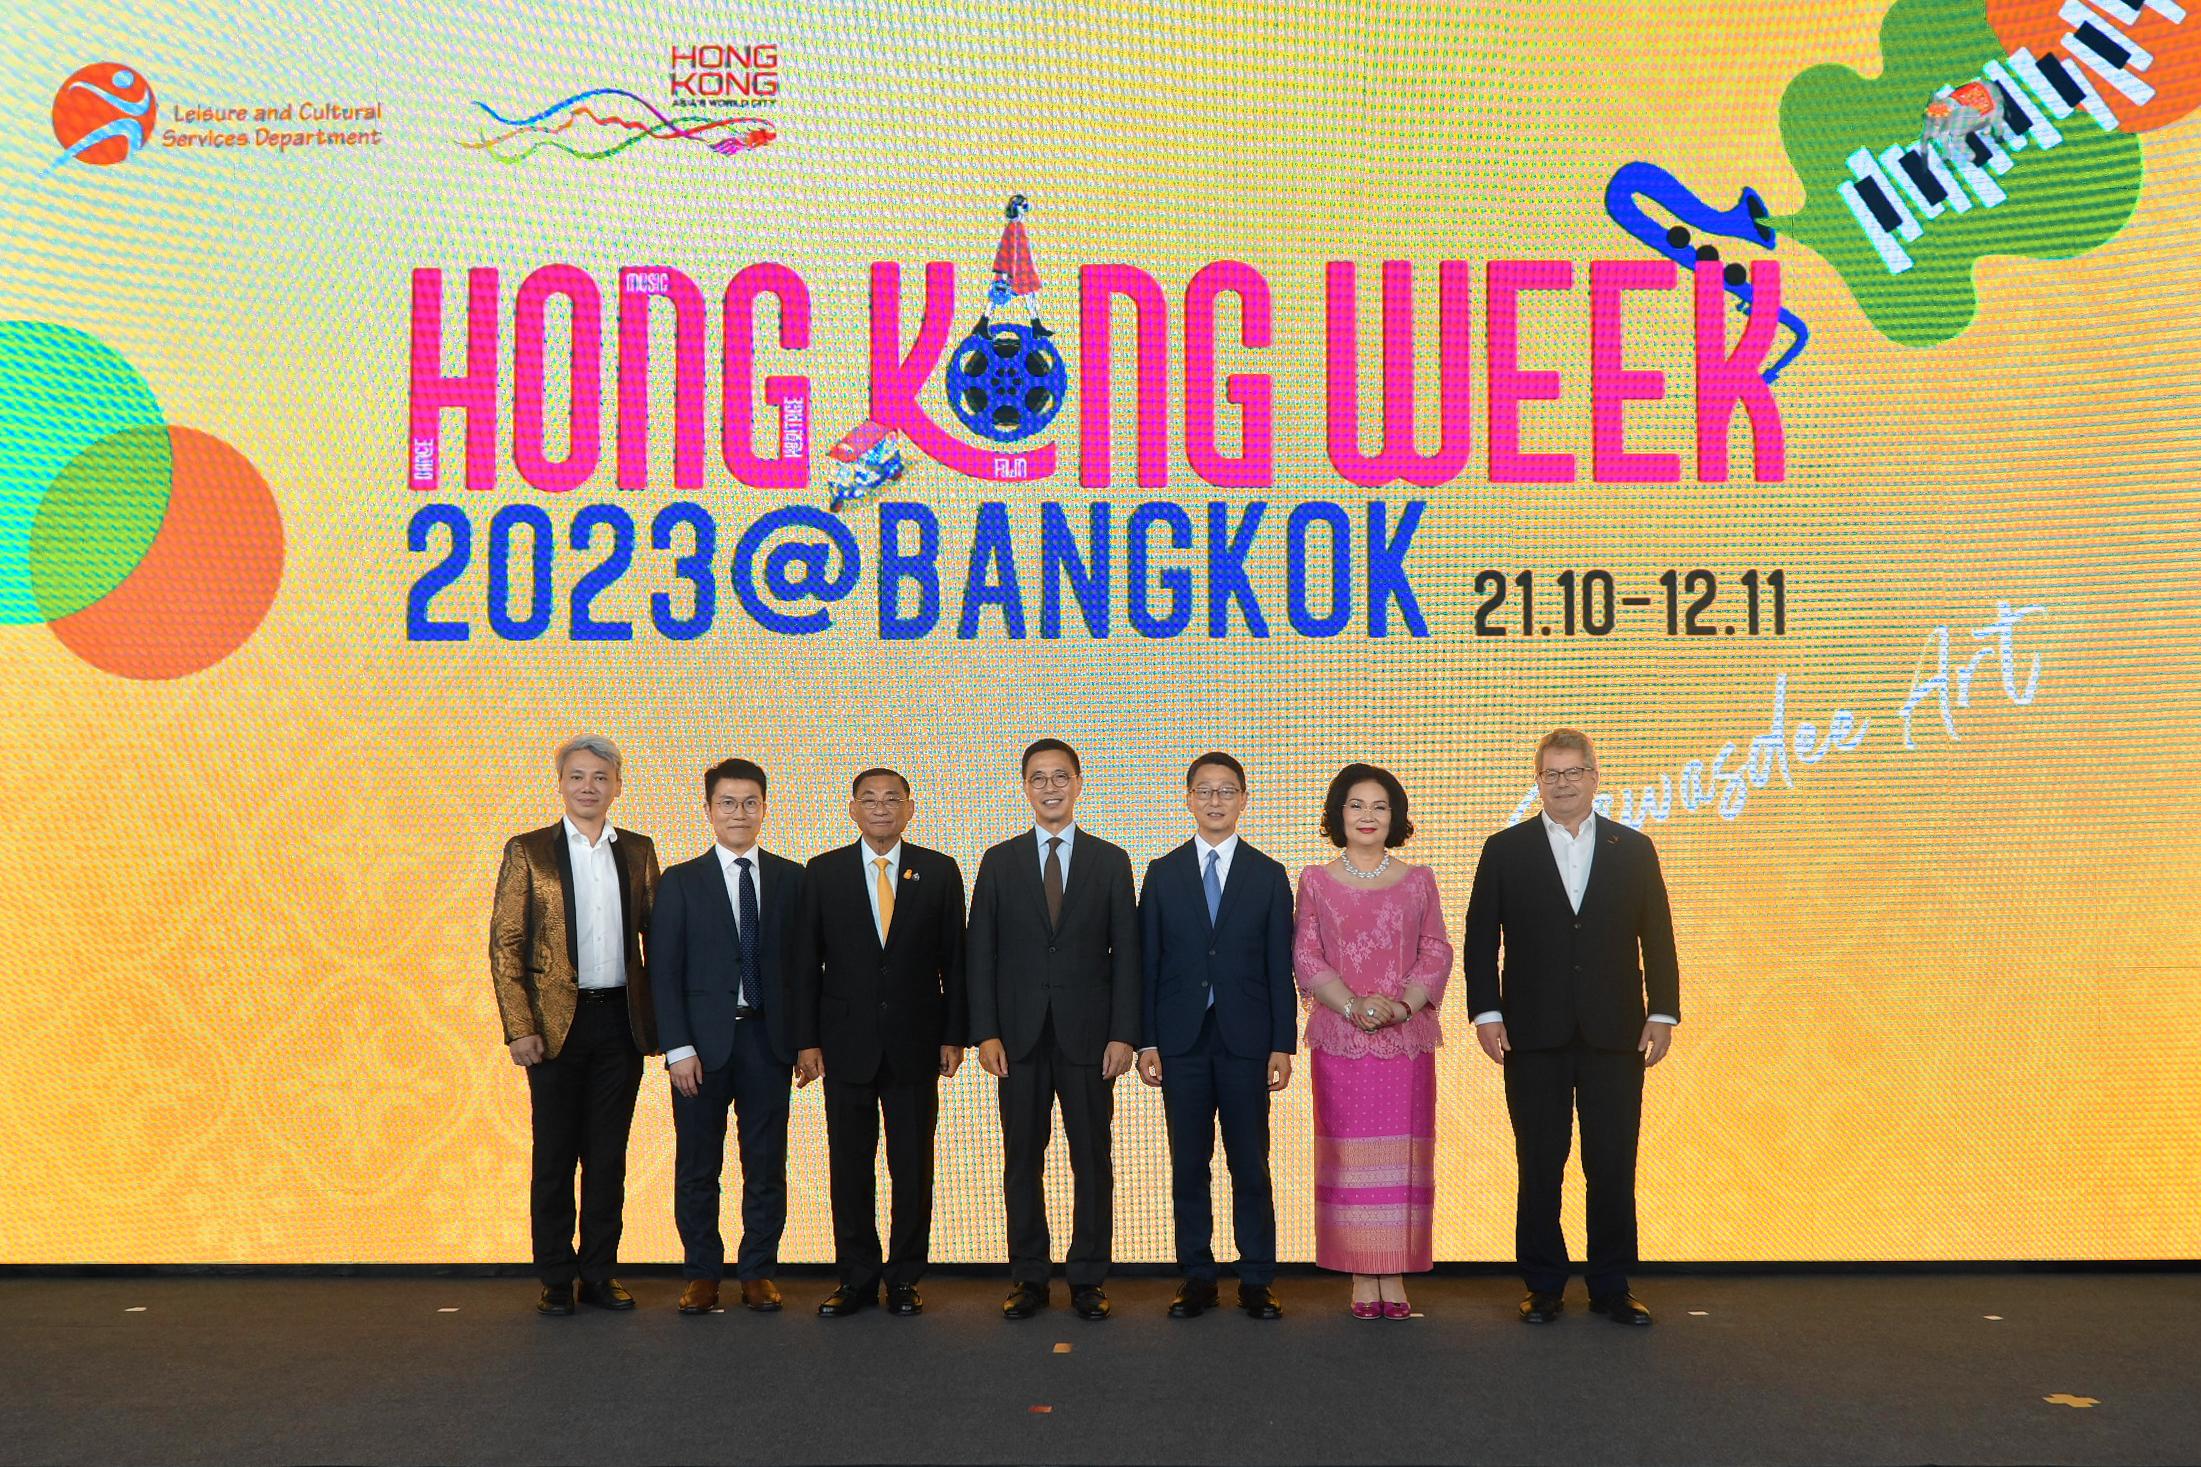 The opening ceremony for Hong Kong Week 2023@Bangkok was held today (October 21, Bangkok time) at the Prince Mahidol Hall in Thailand, raising the curtain for the Hong Kong week. Photo shows (from left) the Dean of the College of Music of the Mahidol University, Dr Narong Prangcharoen; the Director of the Hong Kong Economic and Trade Office in Bangkok, Mr Parson Lam; the Minister of Culture, Kingdom of Thailand, Mr Sermsak Pongpanit; the Secretary for Culture, Sports and Tourism, Mr Kevin Yeung; the Director of Leisure and Cultural Services, Mr Vincent Liu; the Chairperson of the Board of Directors of the Thailand Philharmonic Orchestra, Khunying Patama Leeswadtrakul; and the Chief Executive of the Hong Kong Philharmonic Orchestra, Mr Benedikt Fohr, officiating at the opening ceremony.